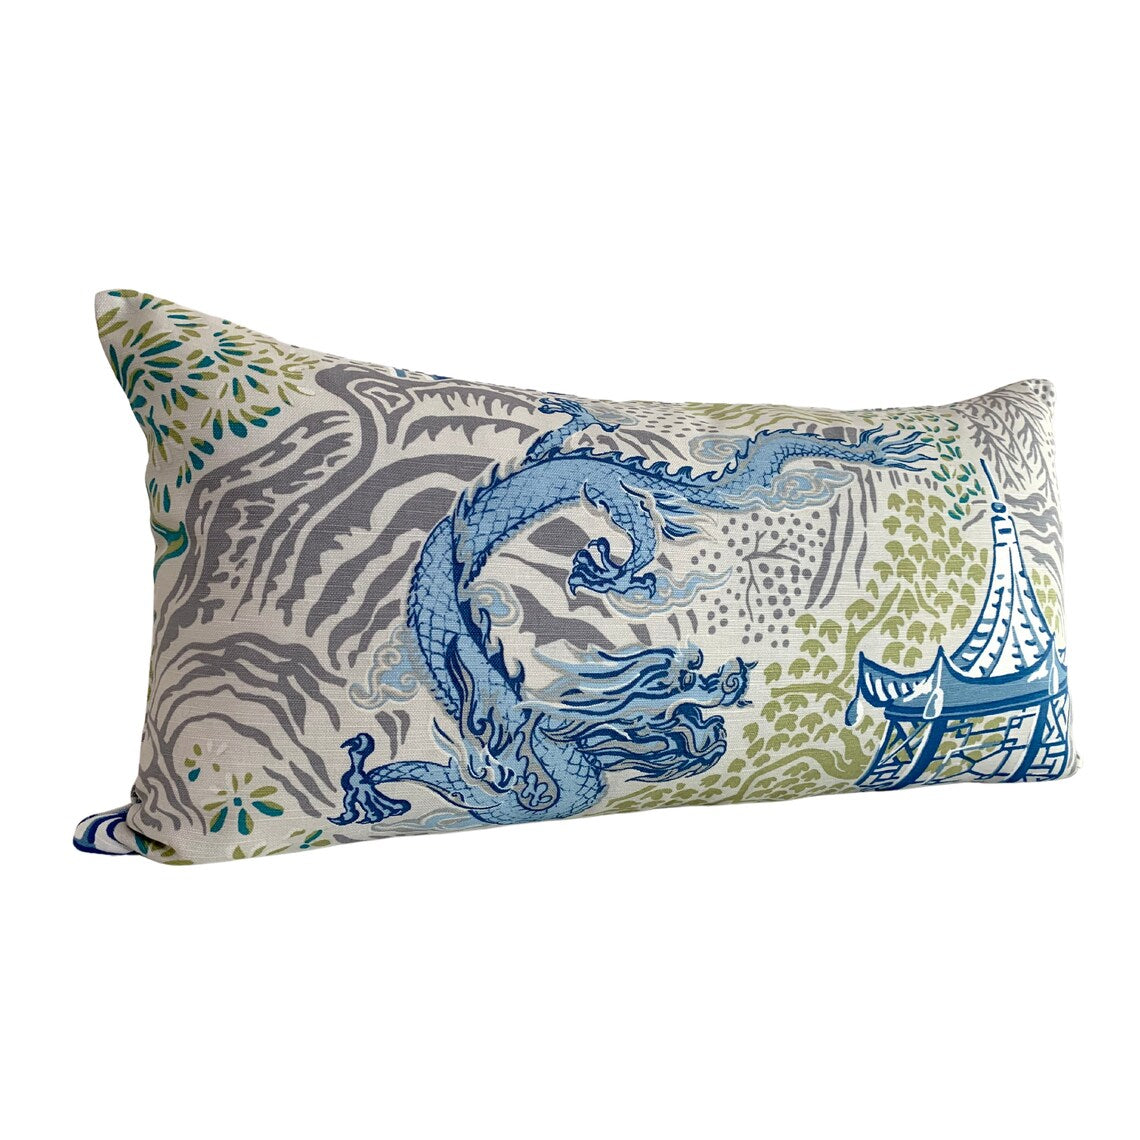 Vern Yip Pagodas Dragon Chinoiserie Pillow Cover in Cobalt - Available in Lumbar, Throw, Bolster, Euro Sham Sizes